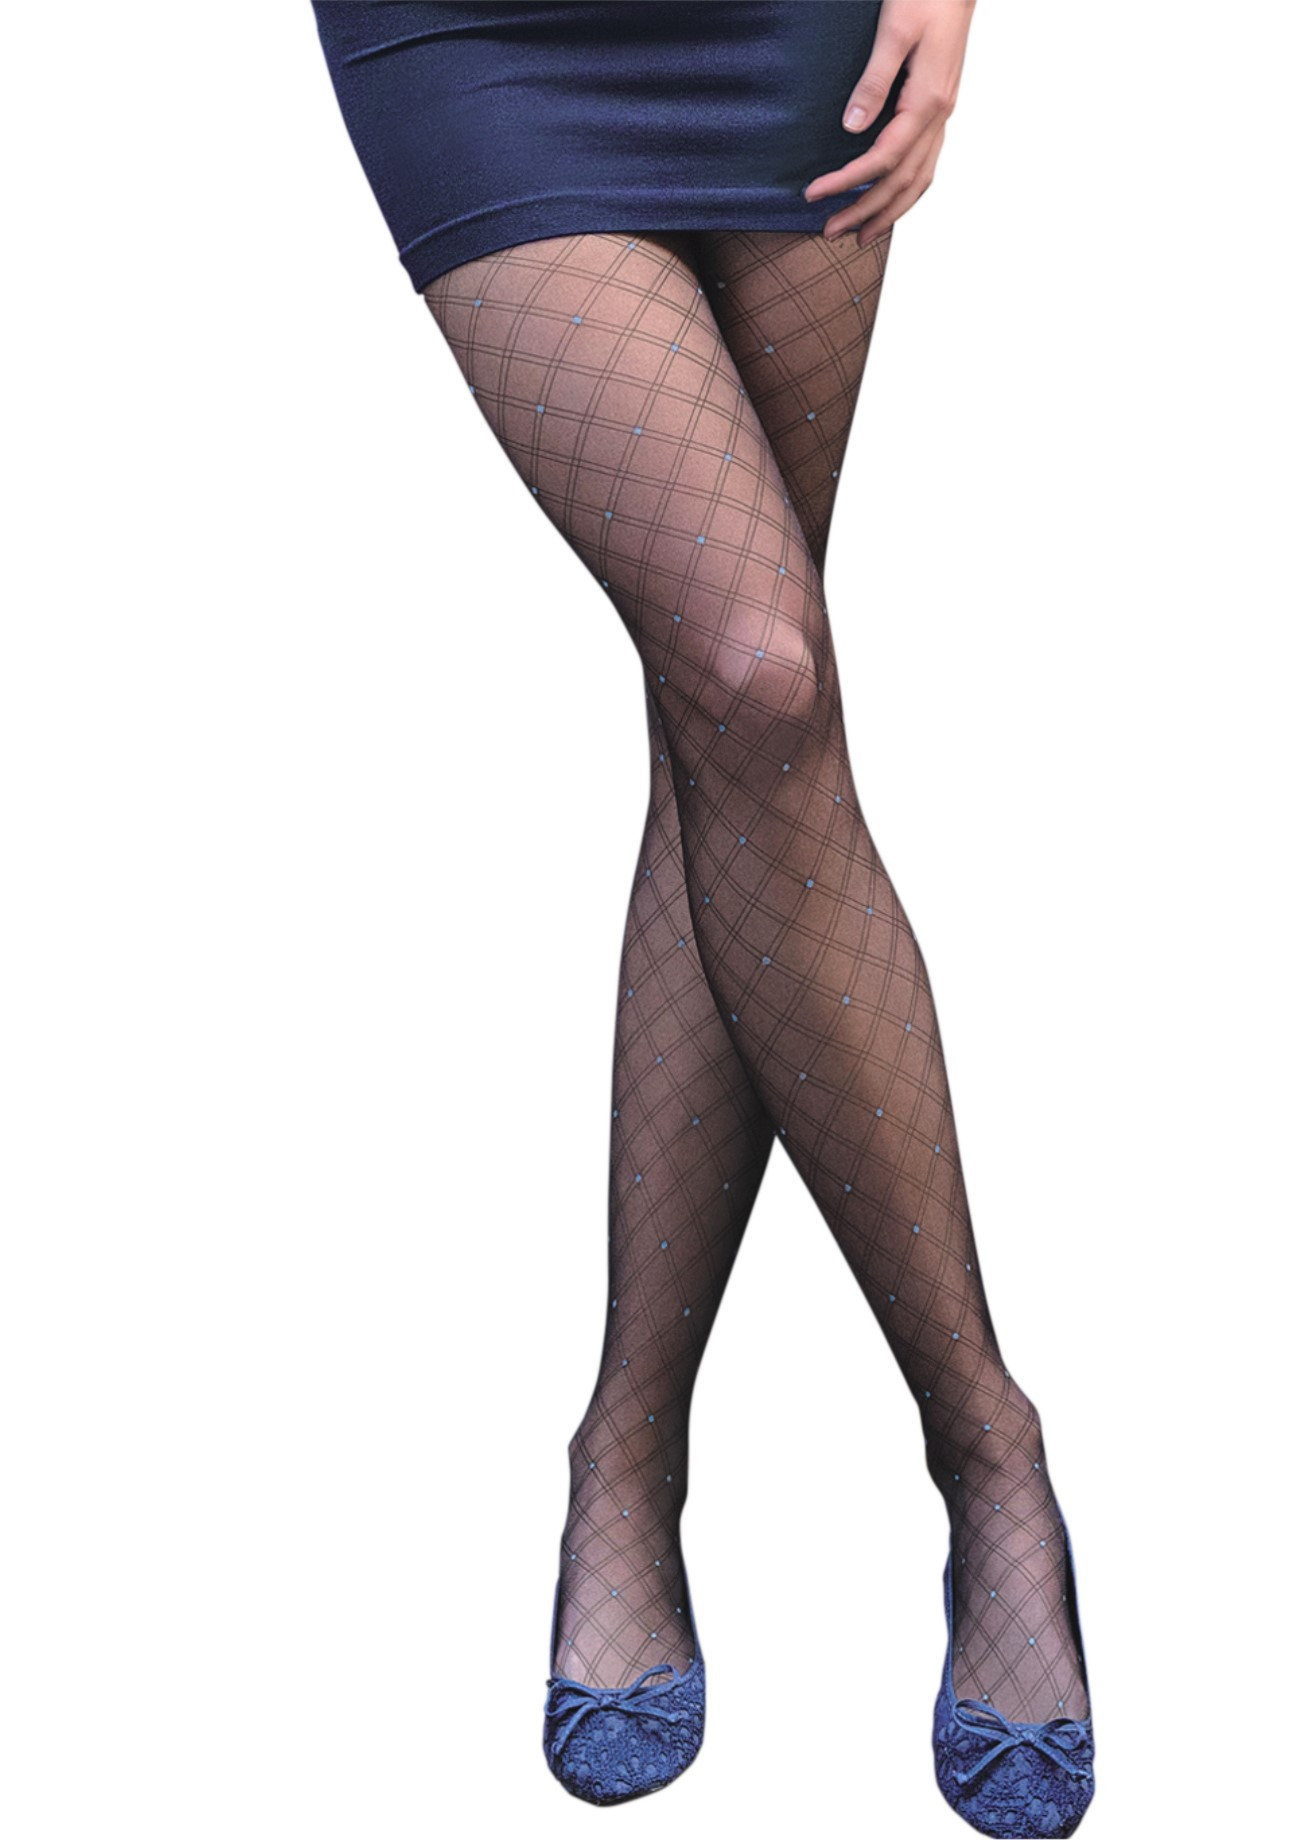 Patterned Tights with Classic Diamond Design